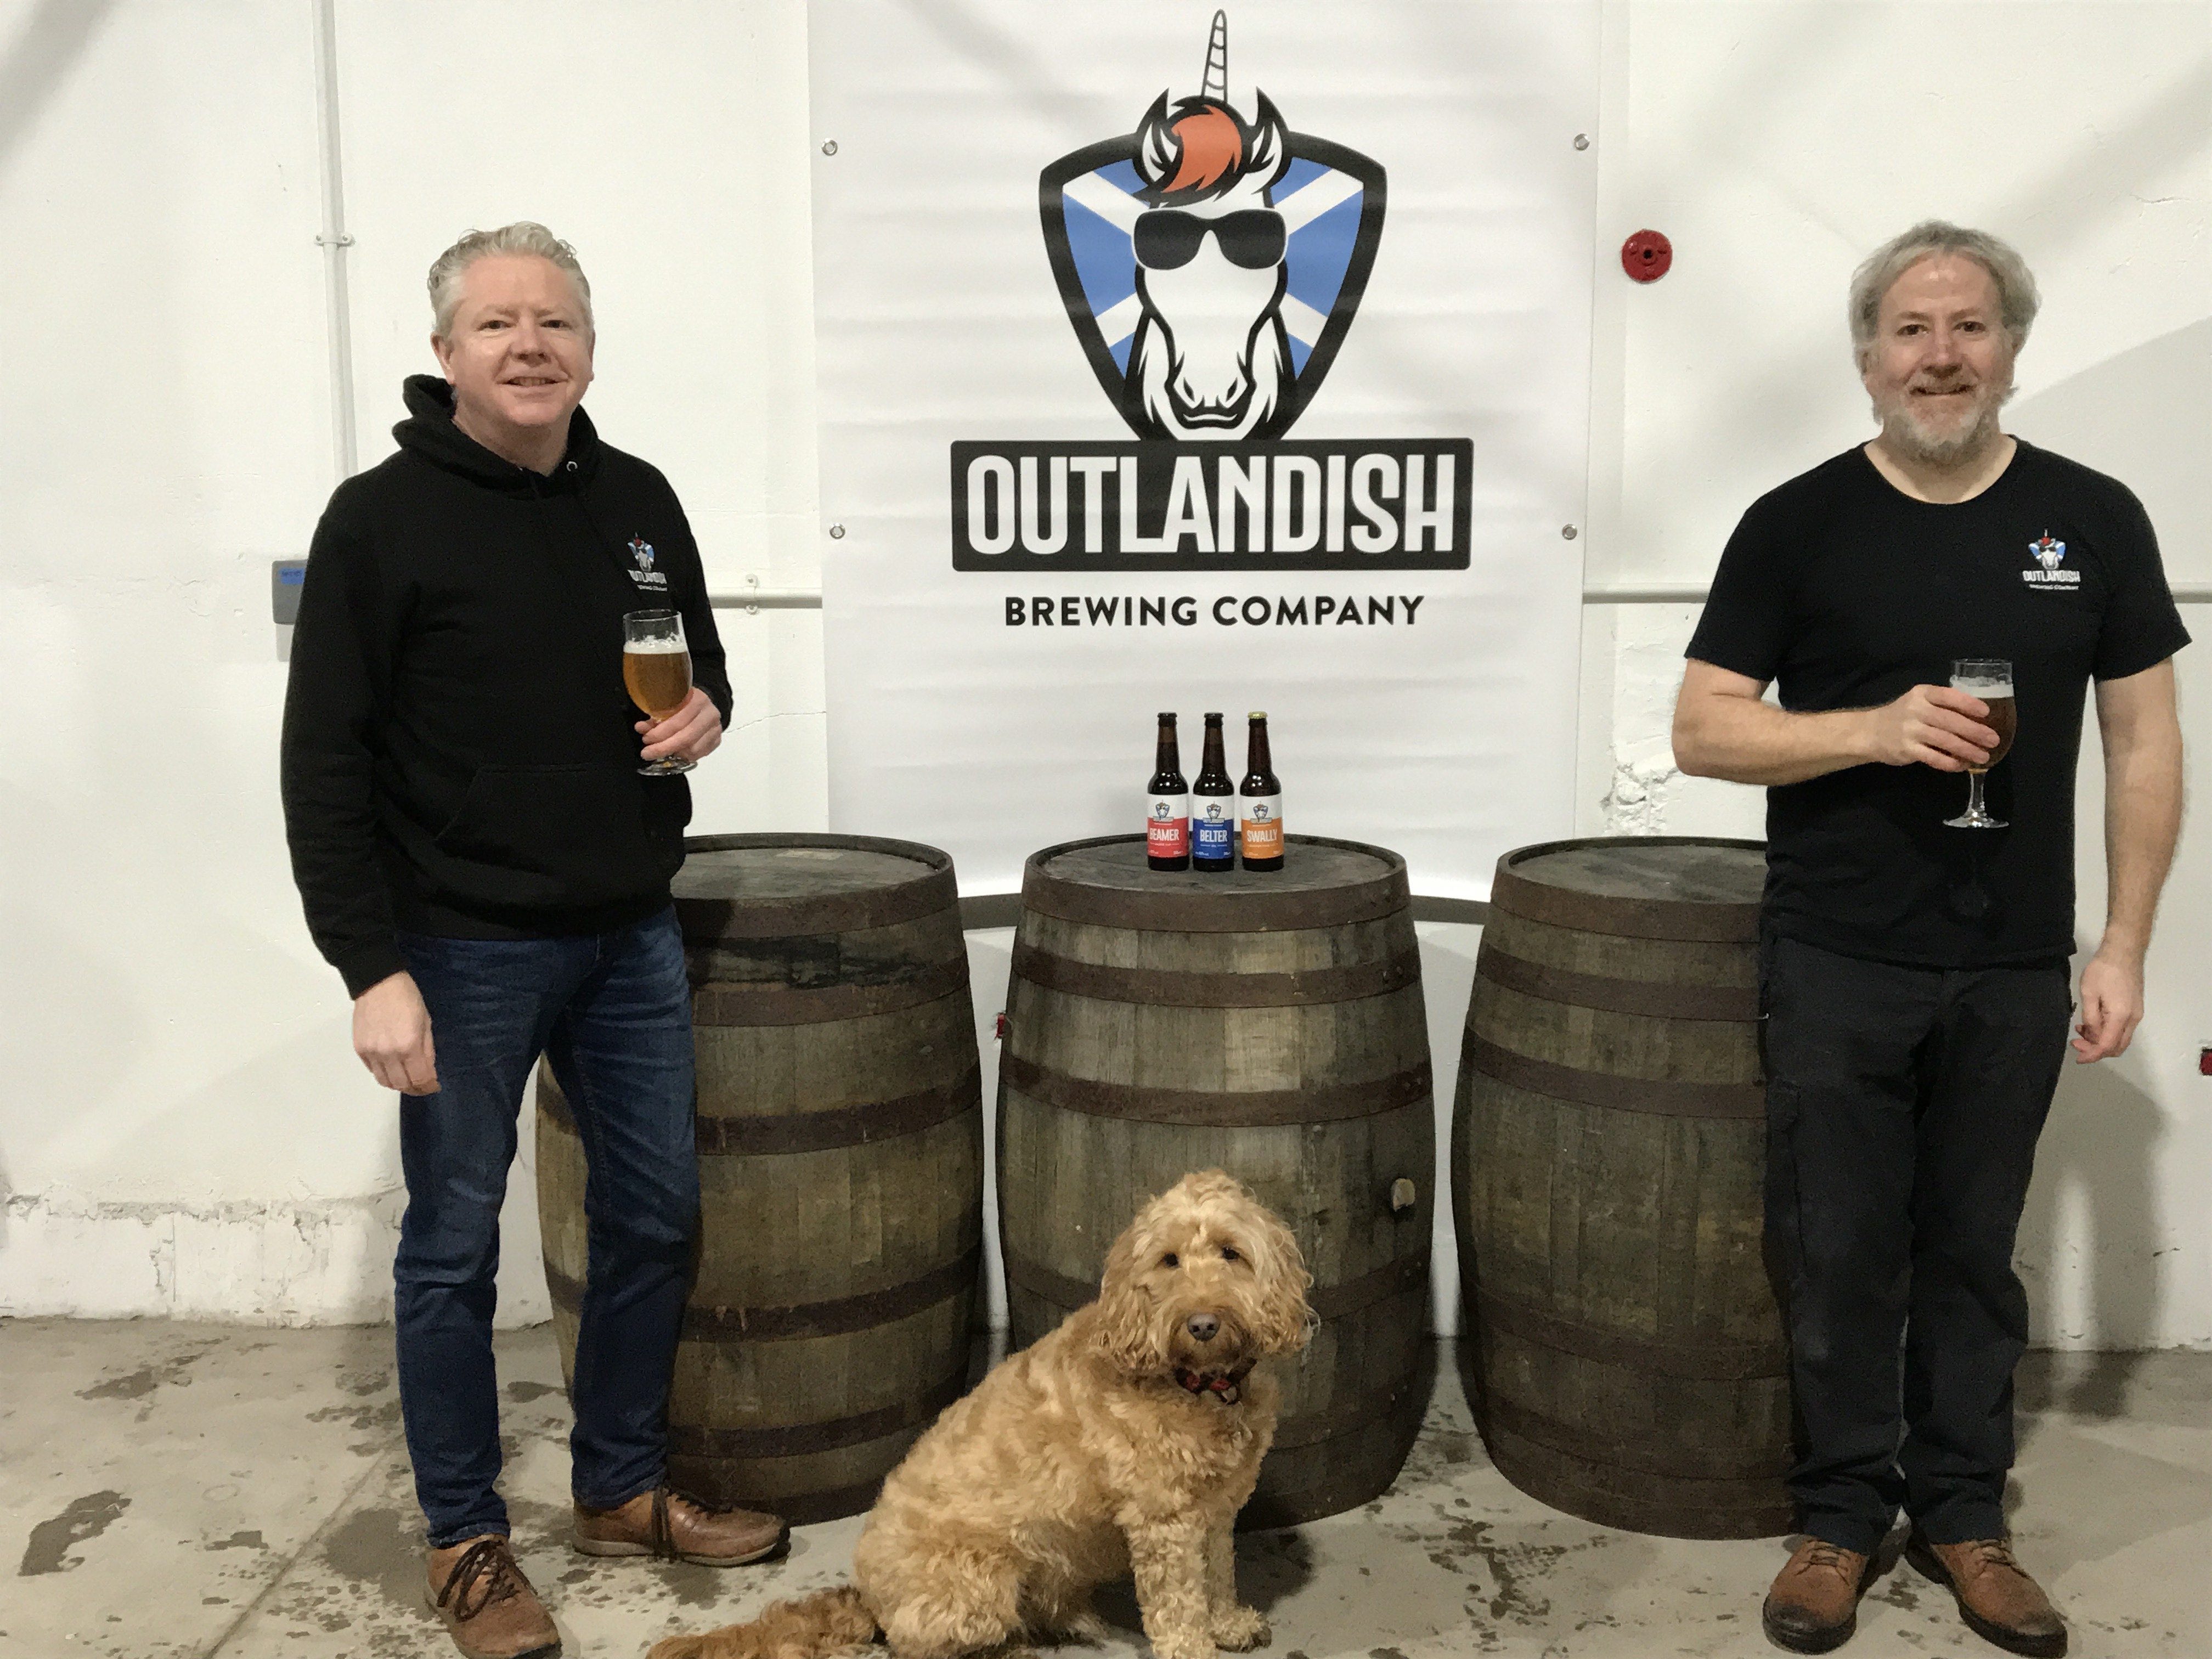 Greenshoots: Lanarkshire brothers open microbrewery thanks to Business Gateway support